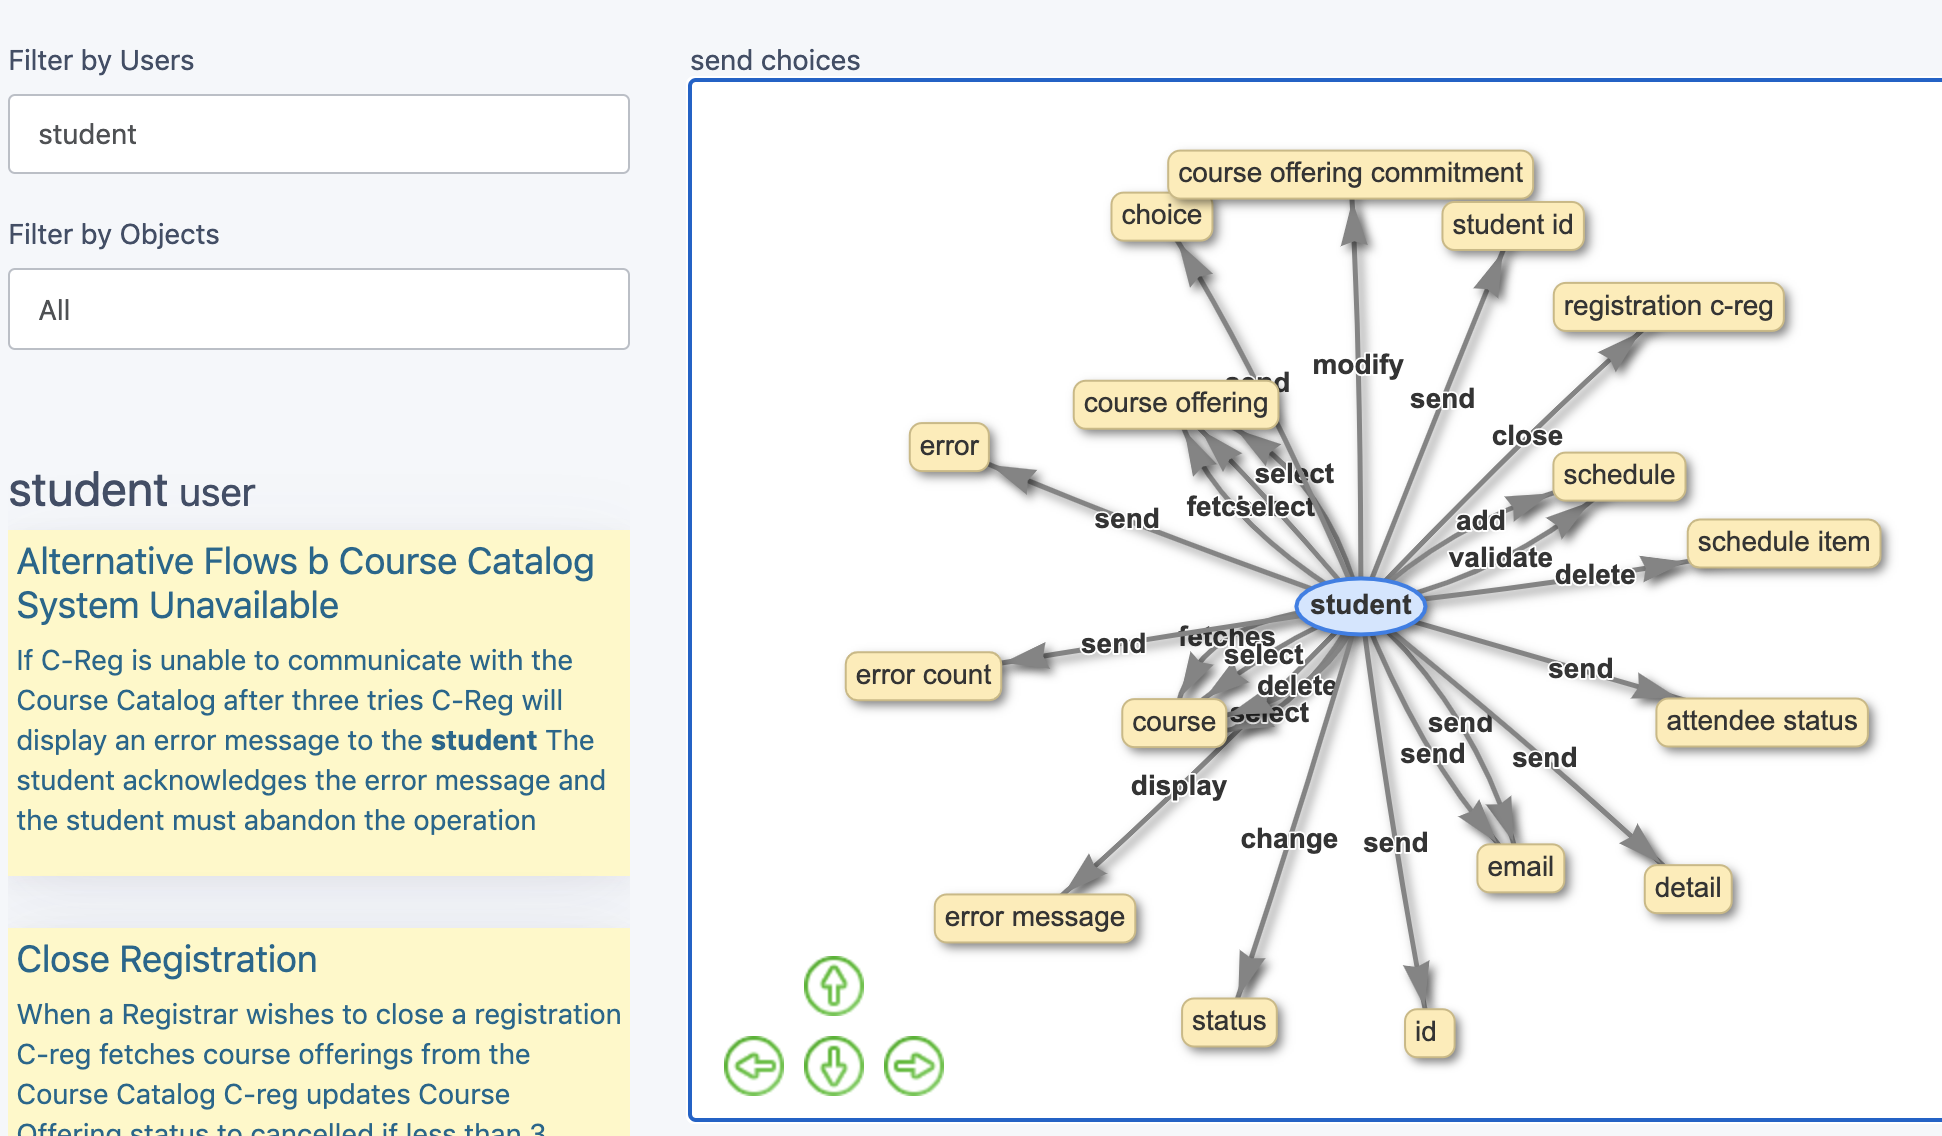 filtering a subset of user stories for a use case - like network diagram